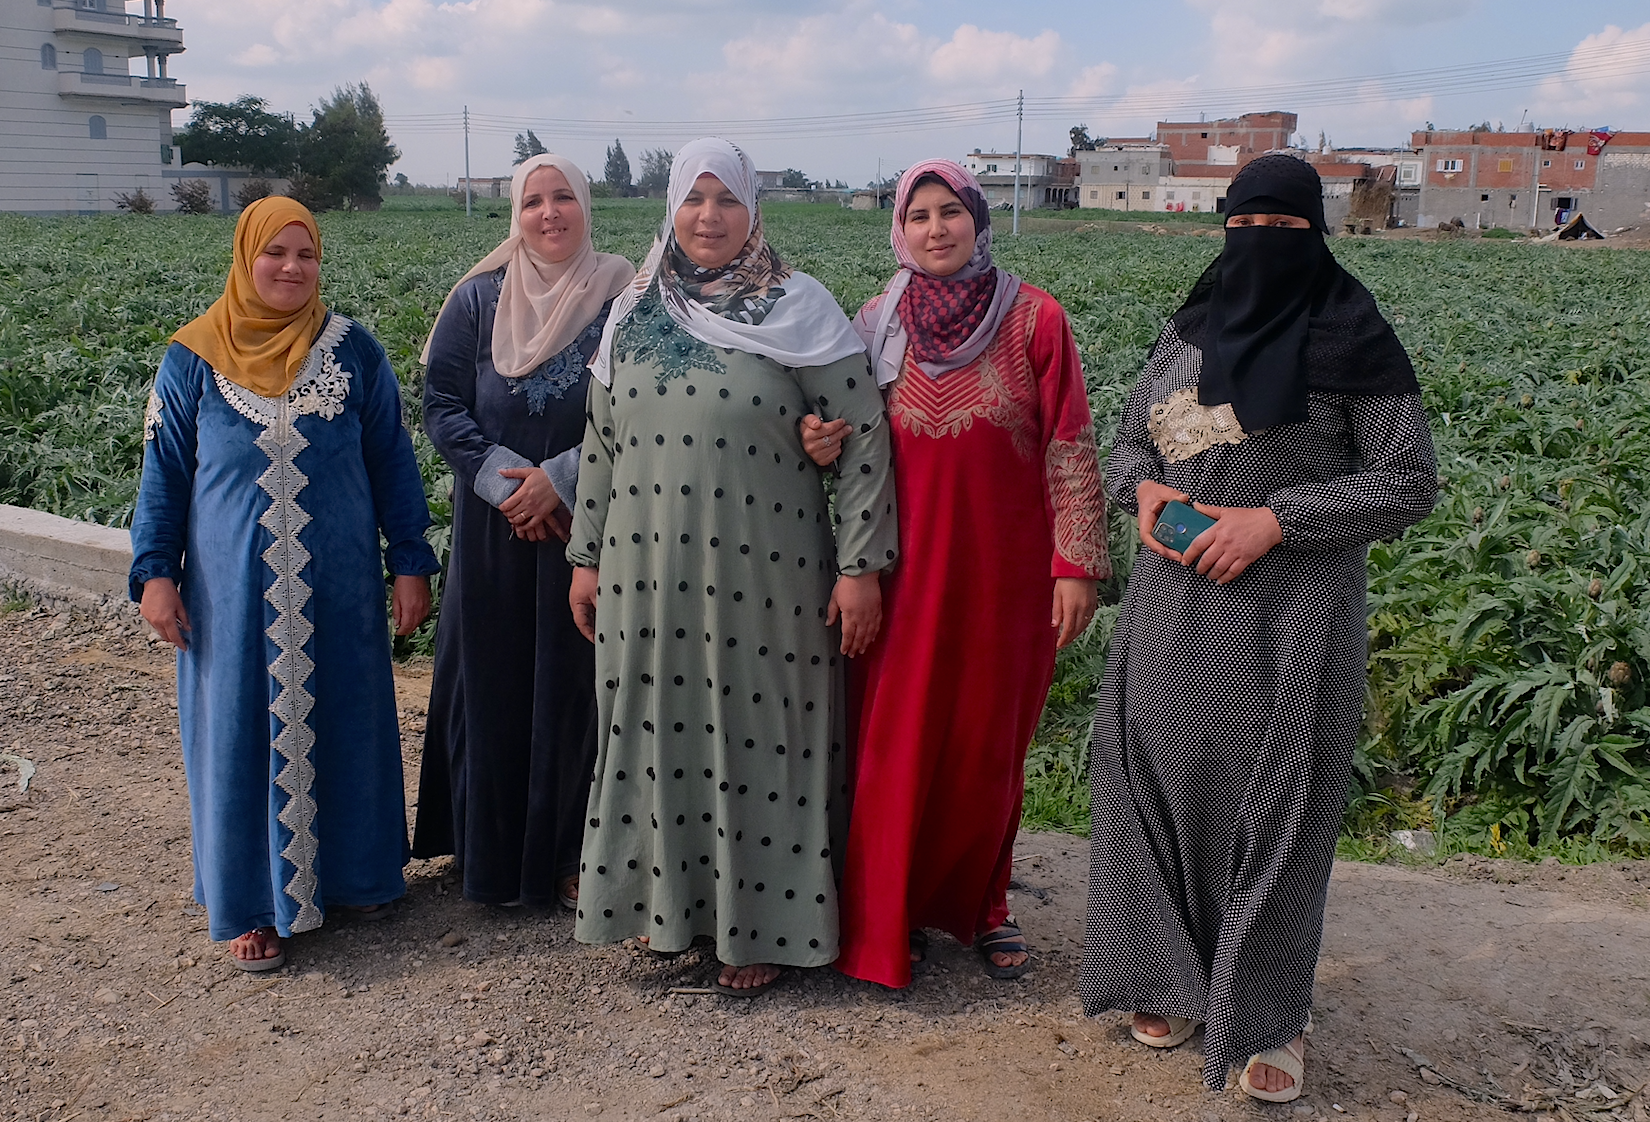 The women helping to pioneer the community center. Photo: Louise Sarant / IWMI